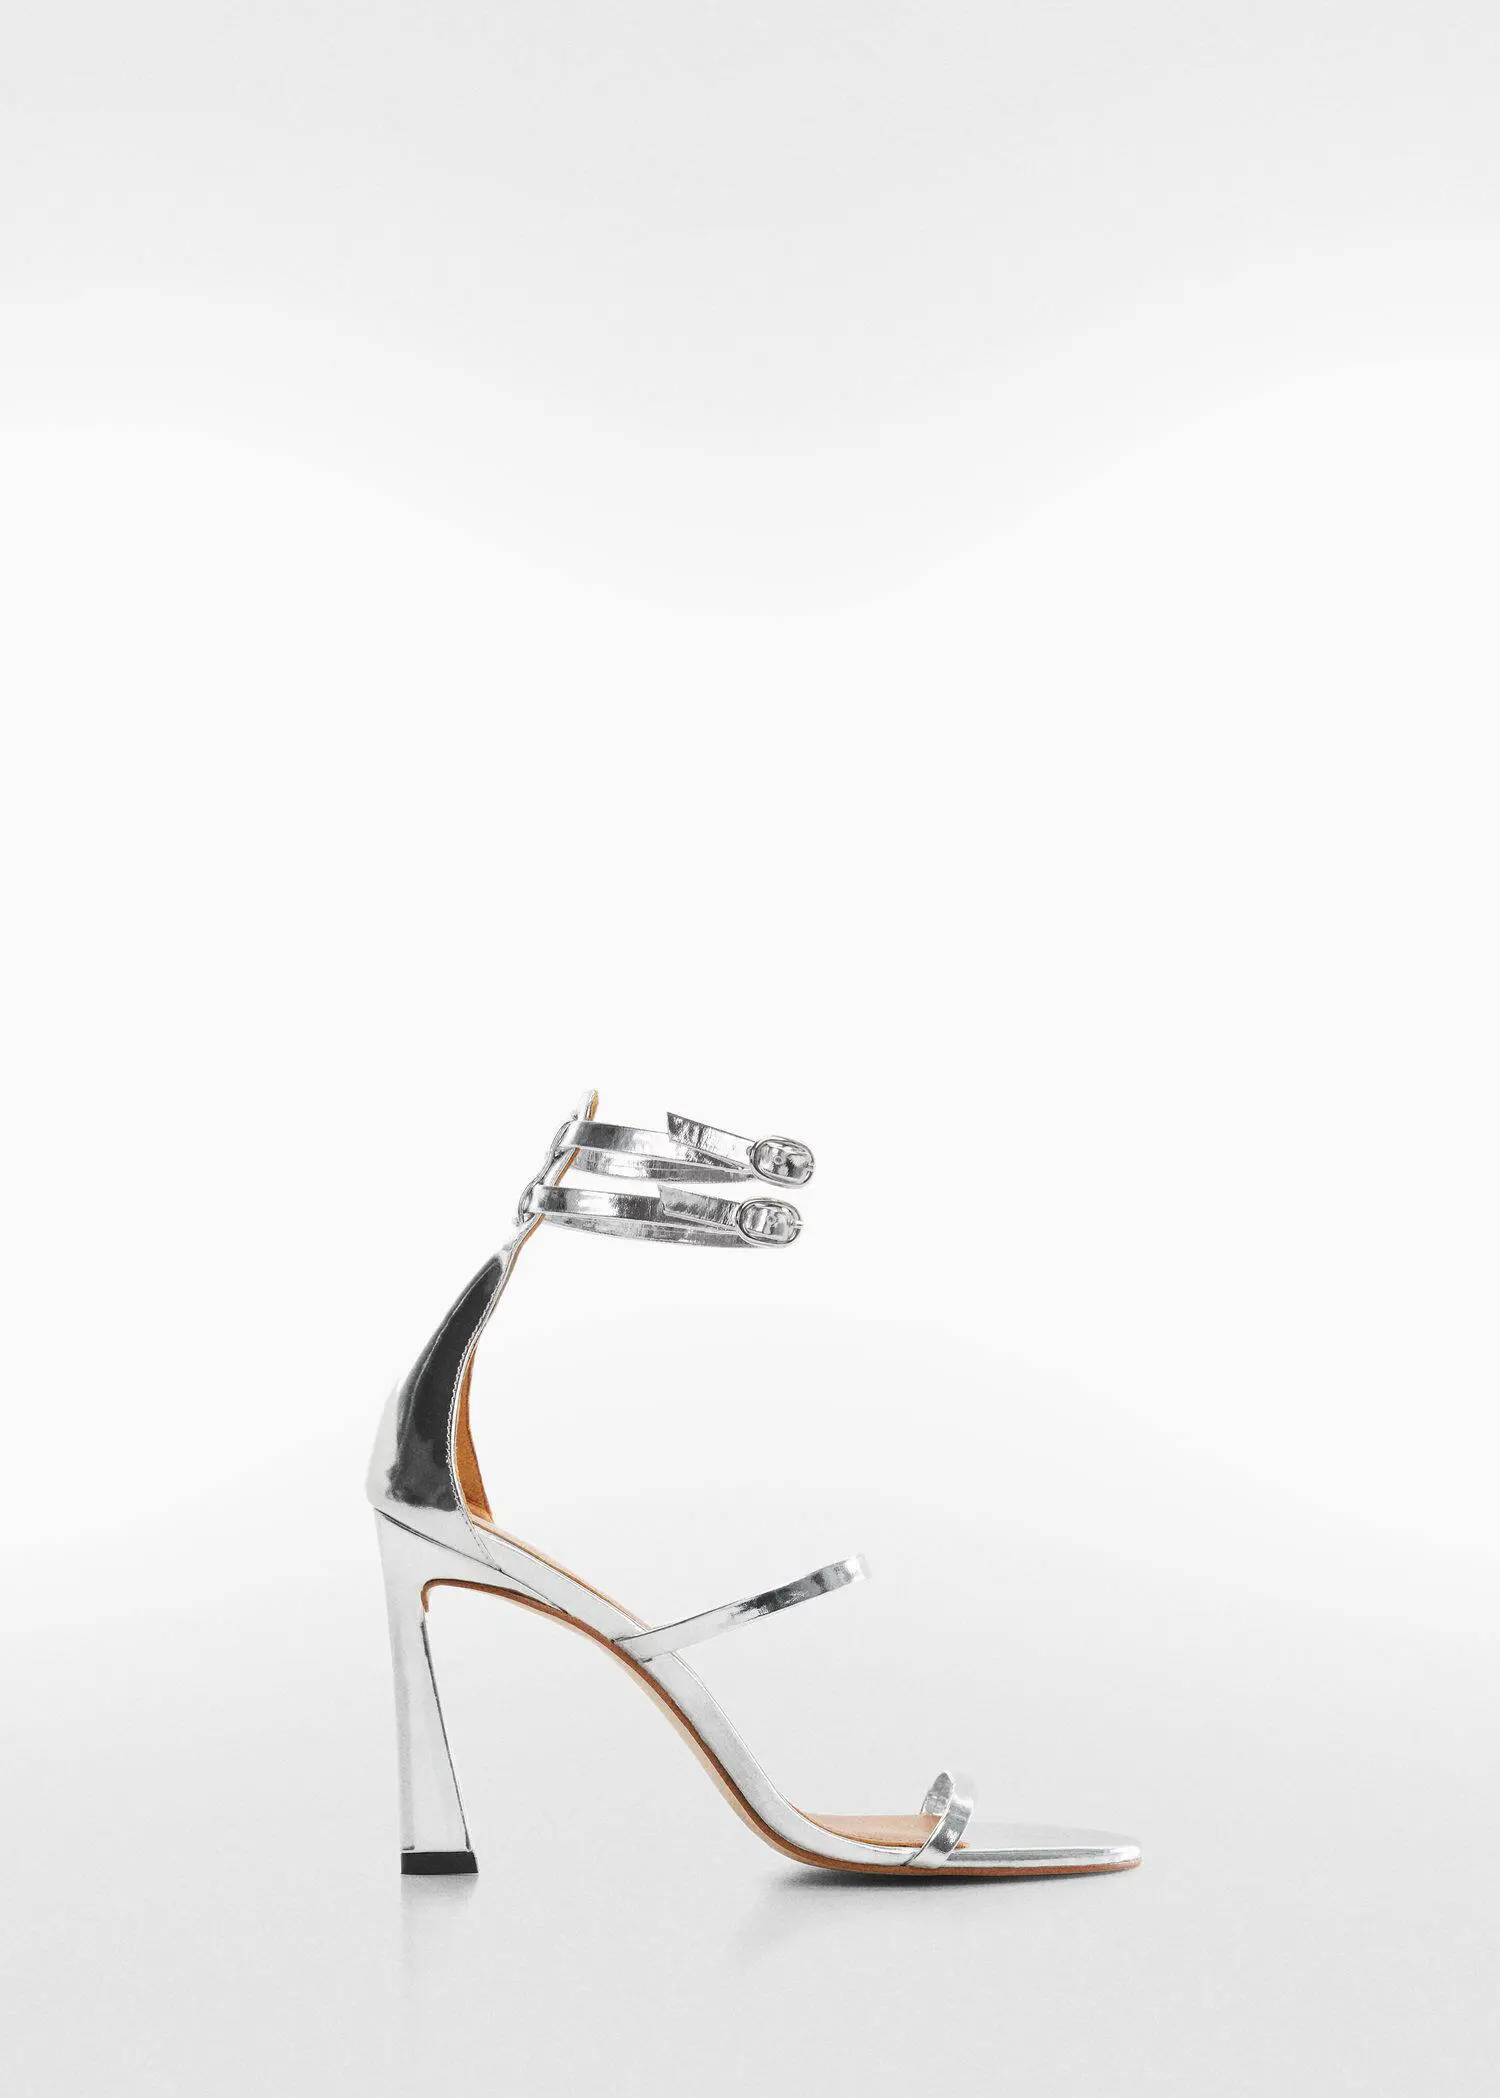 Mango Leather ankle-cuff sandals. a pair of silver high heeled shoes on a white background 